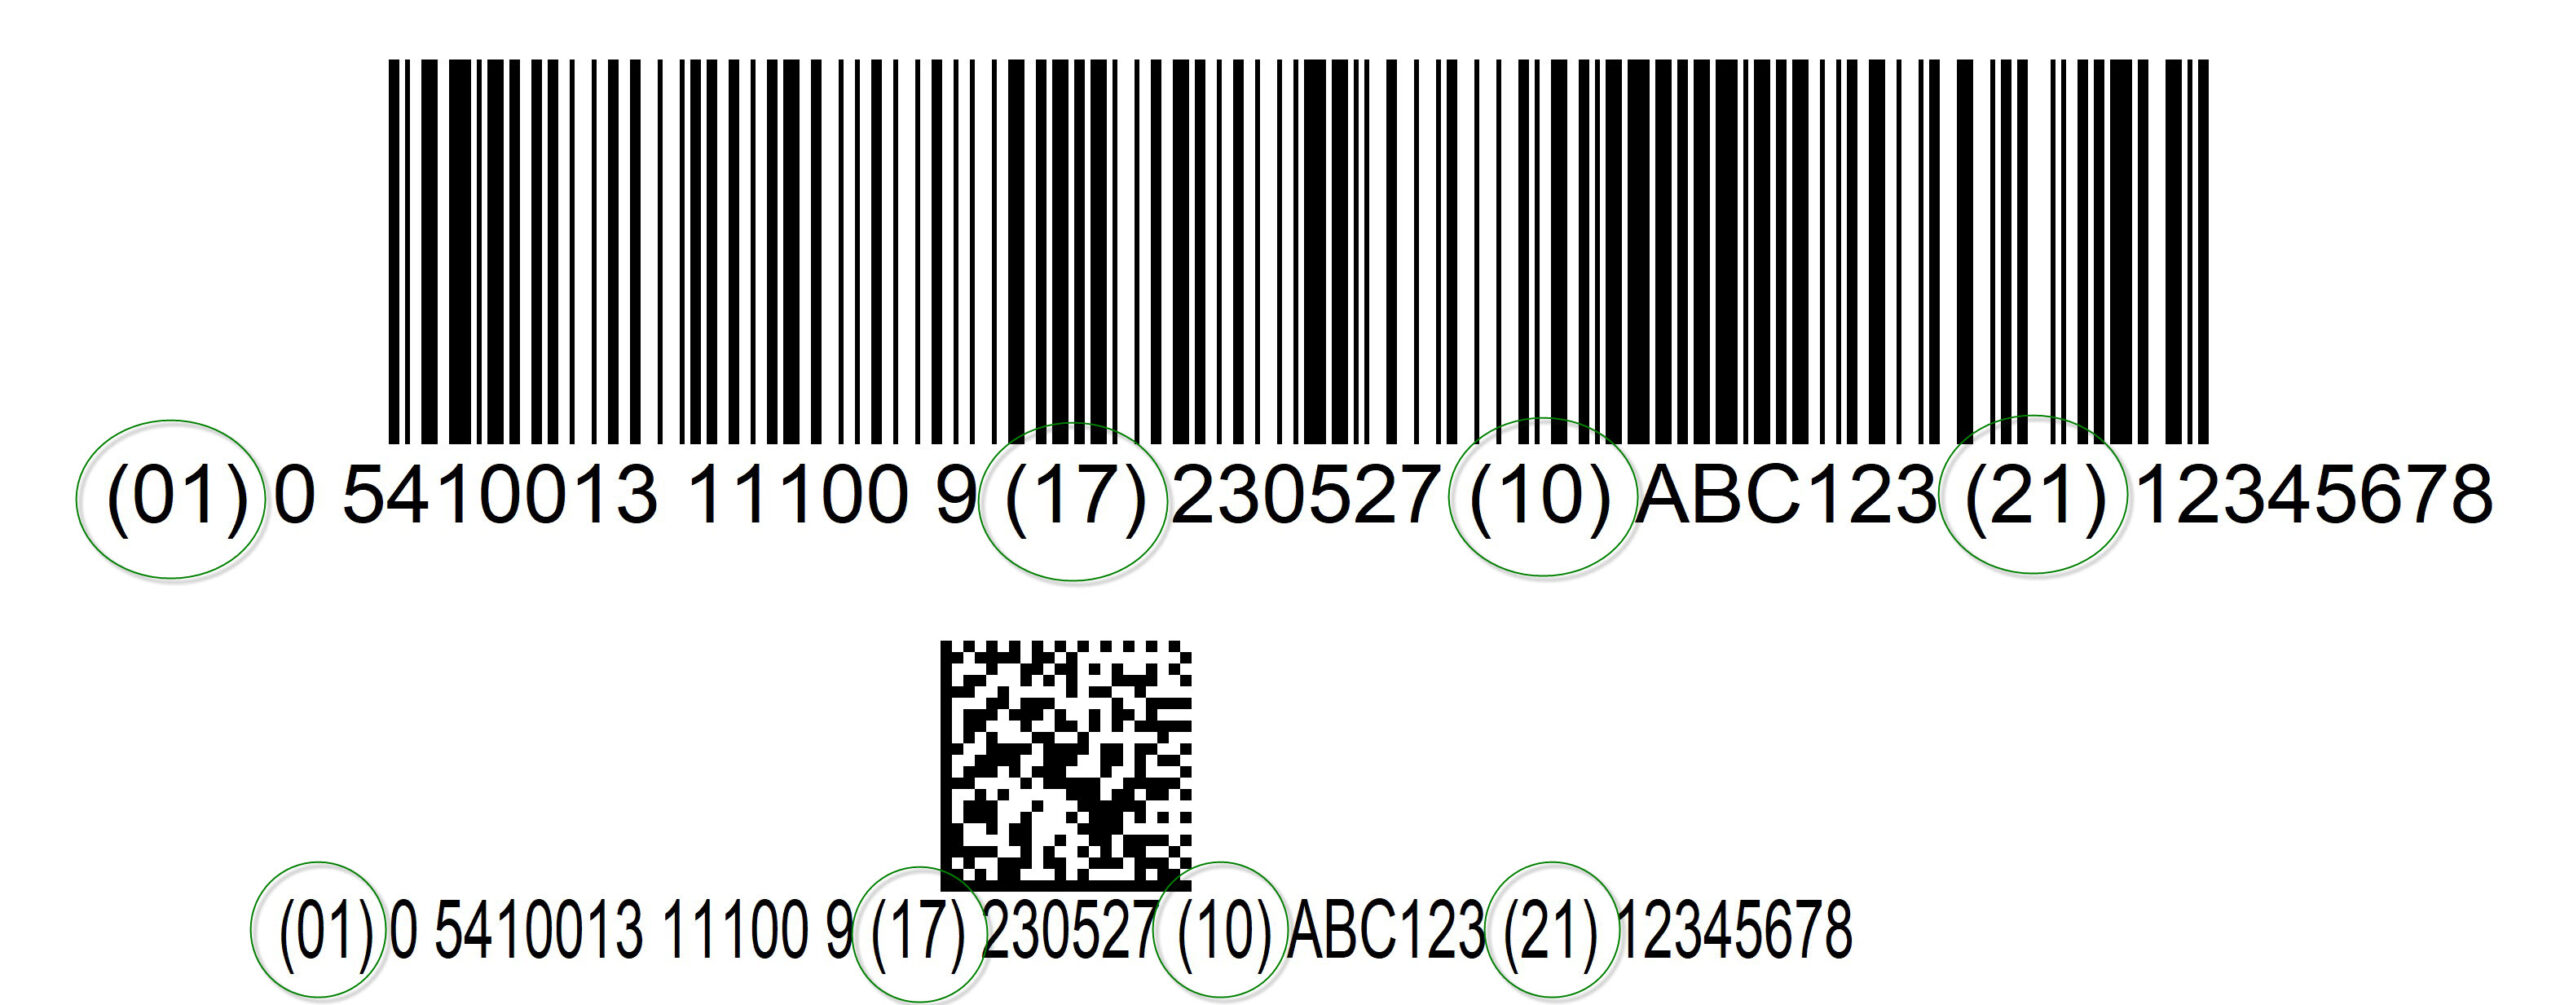 Barcodes_GS1_apllication_identifiers